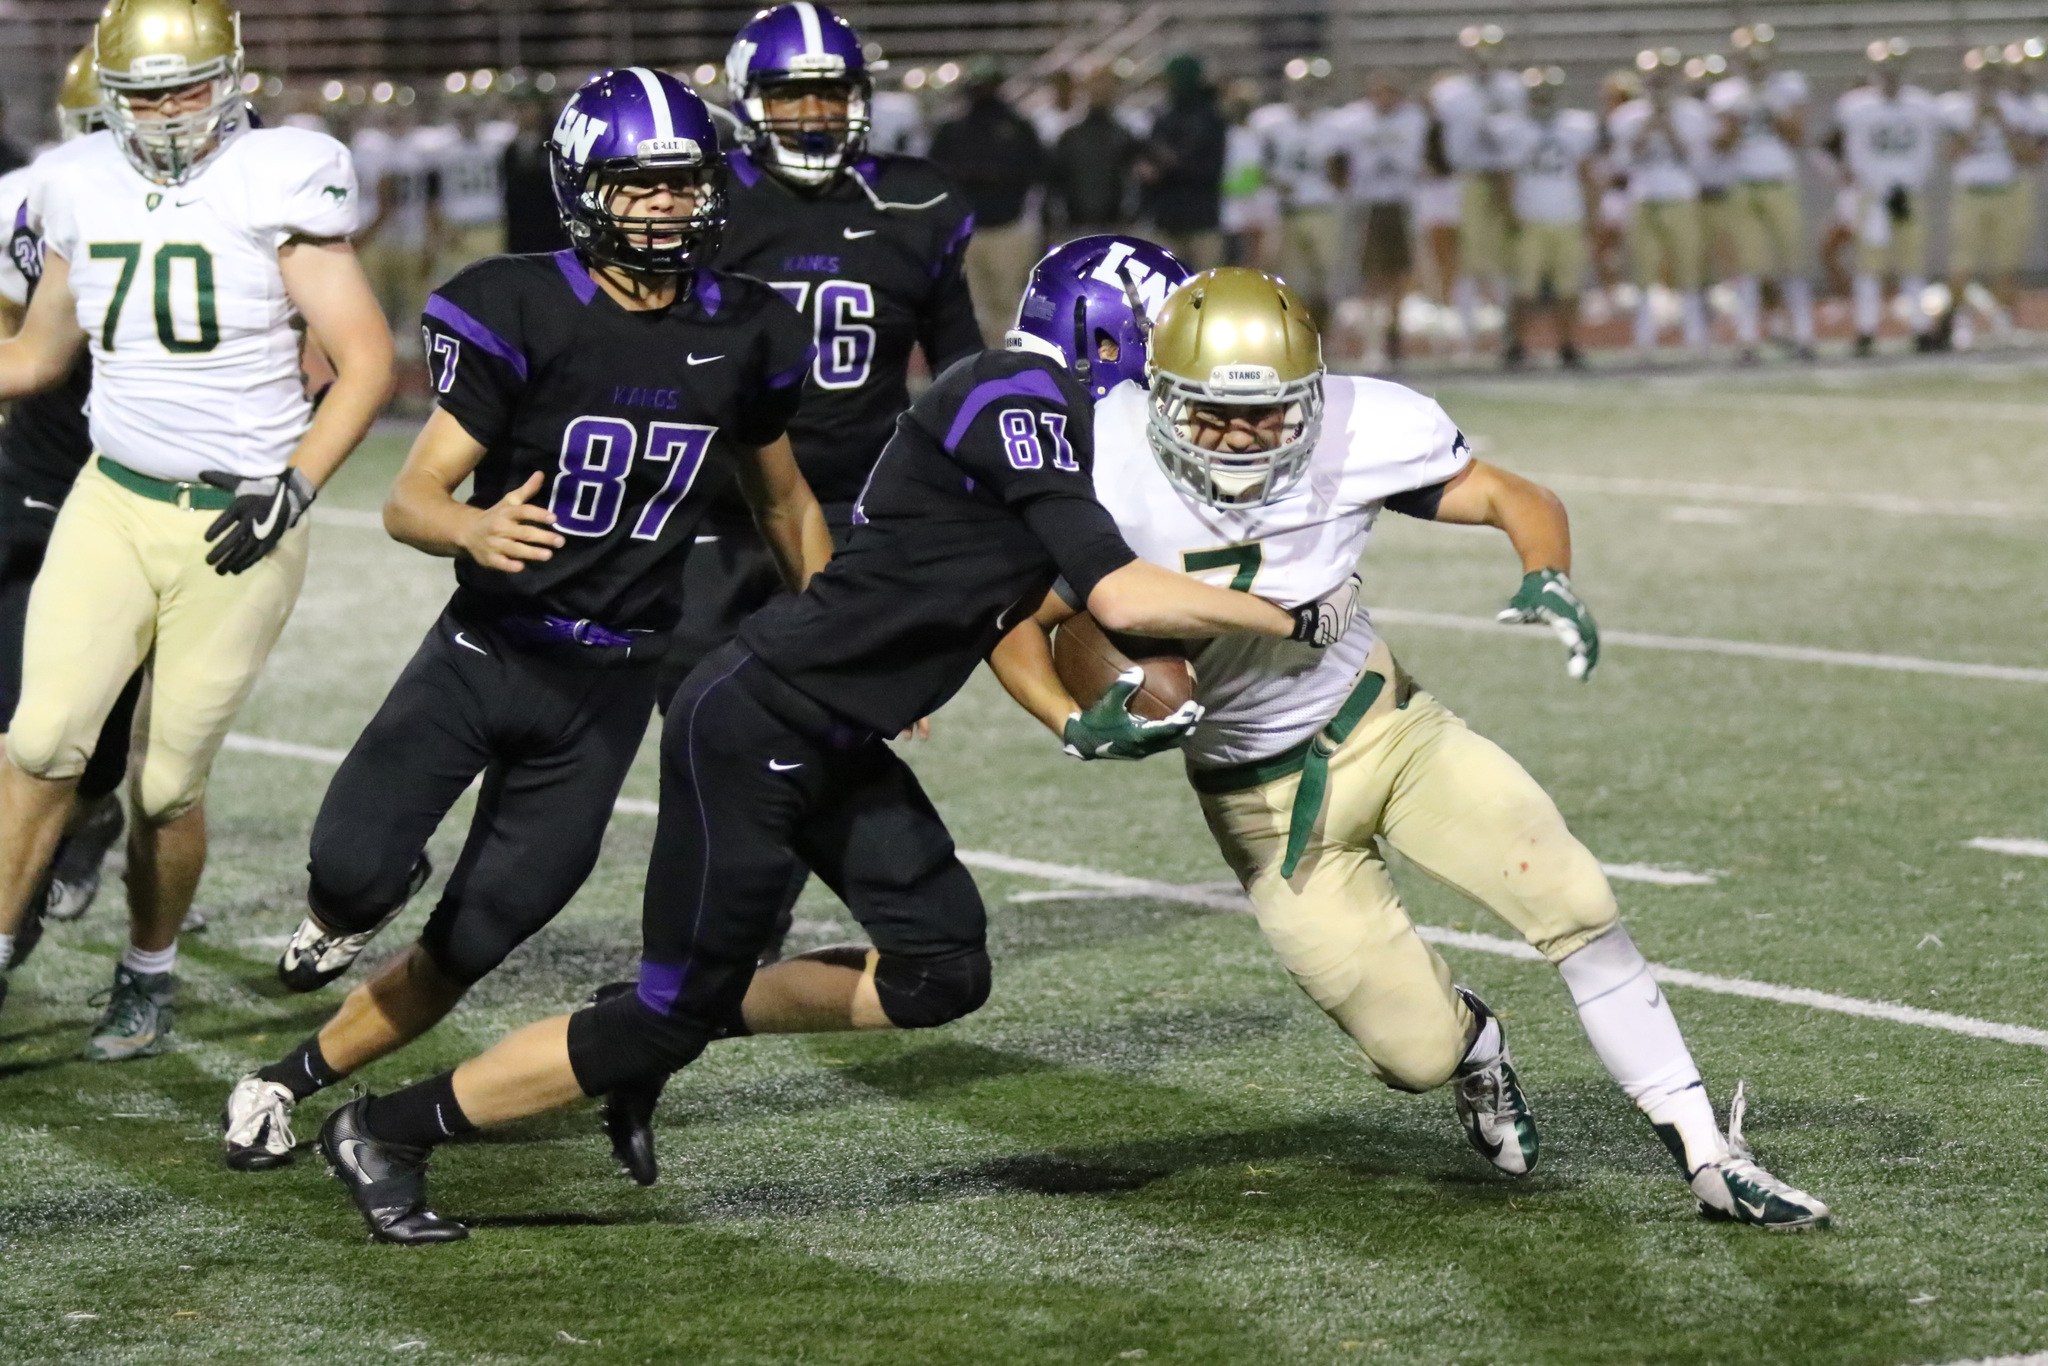 Lake Washington junior safety Sam Showalter (81) tackles Redmond running back Joel Hargin during the first half of Friday’s loss at Mac Field. Photo courtesy of Willie Paine.